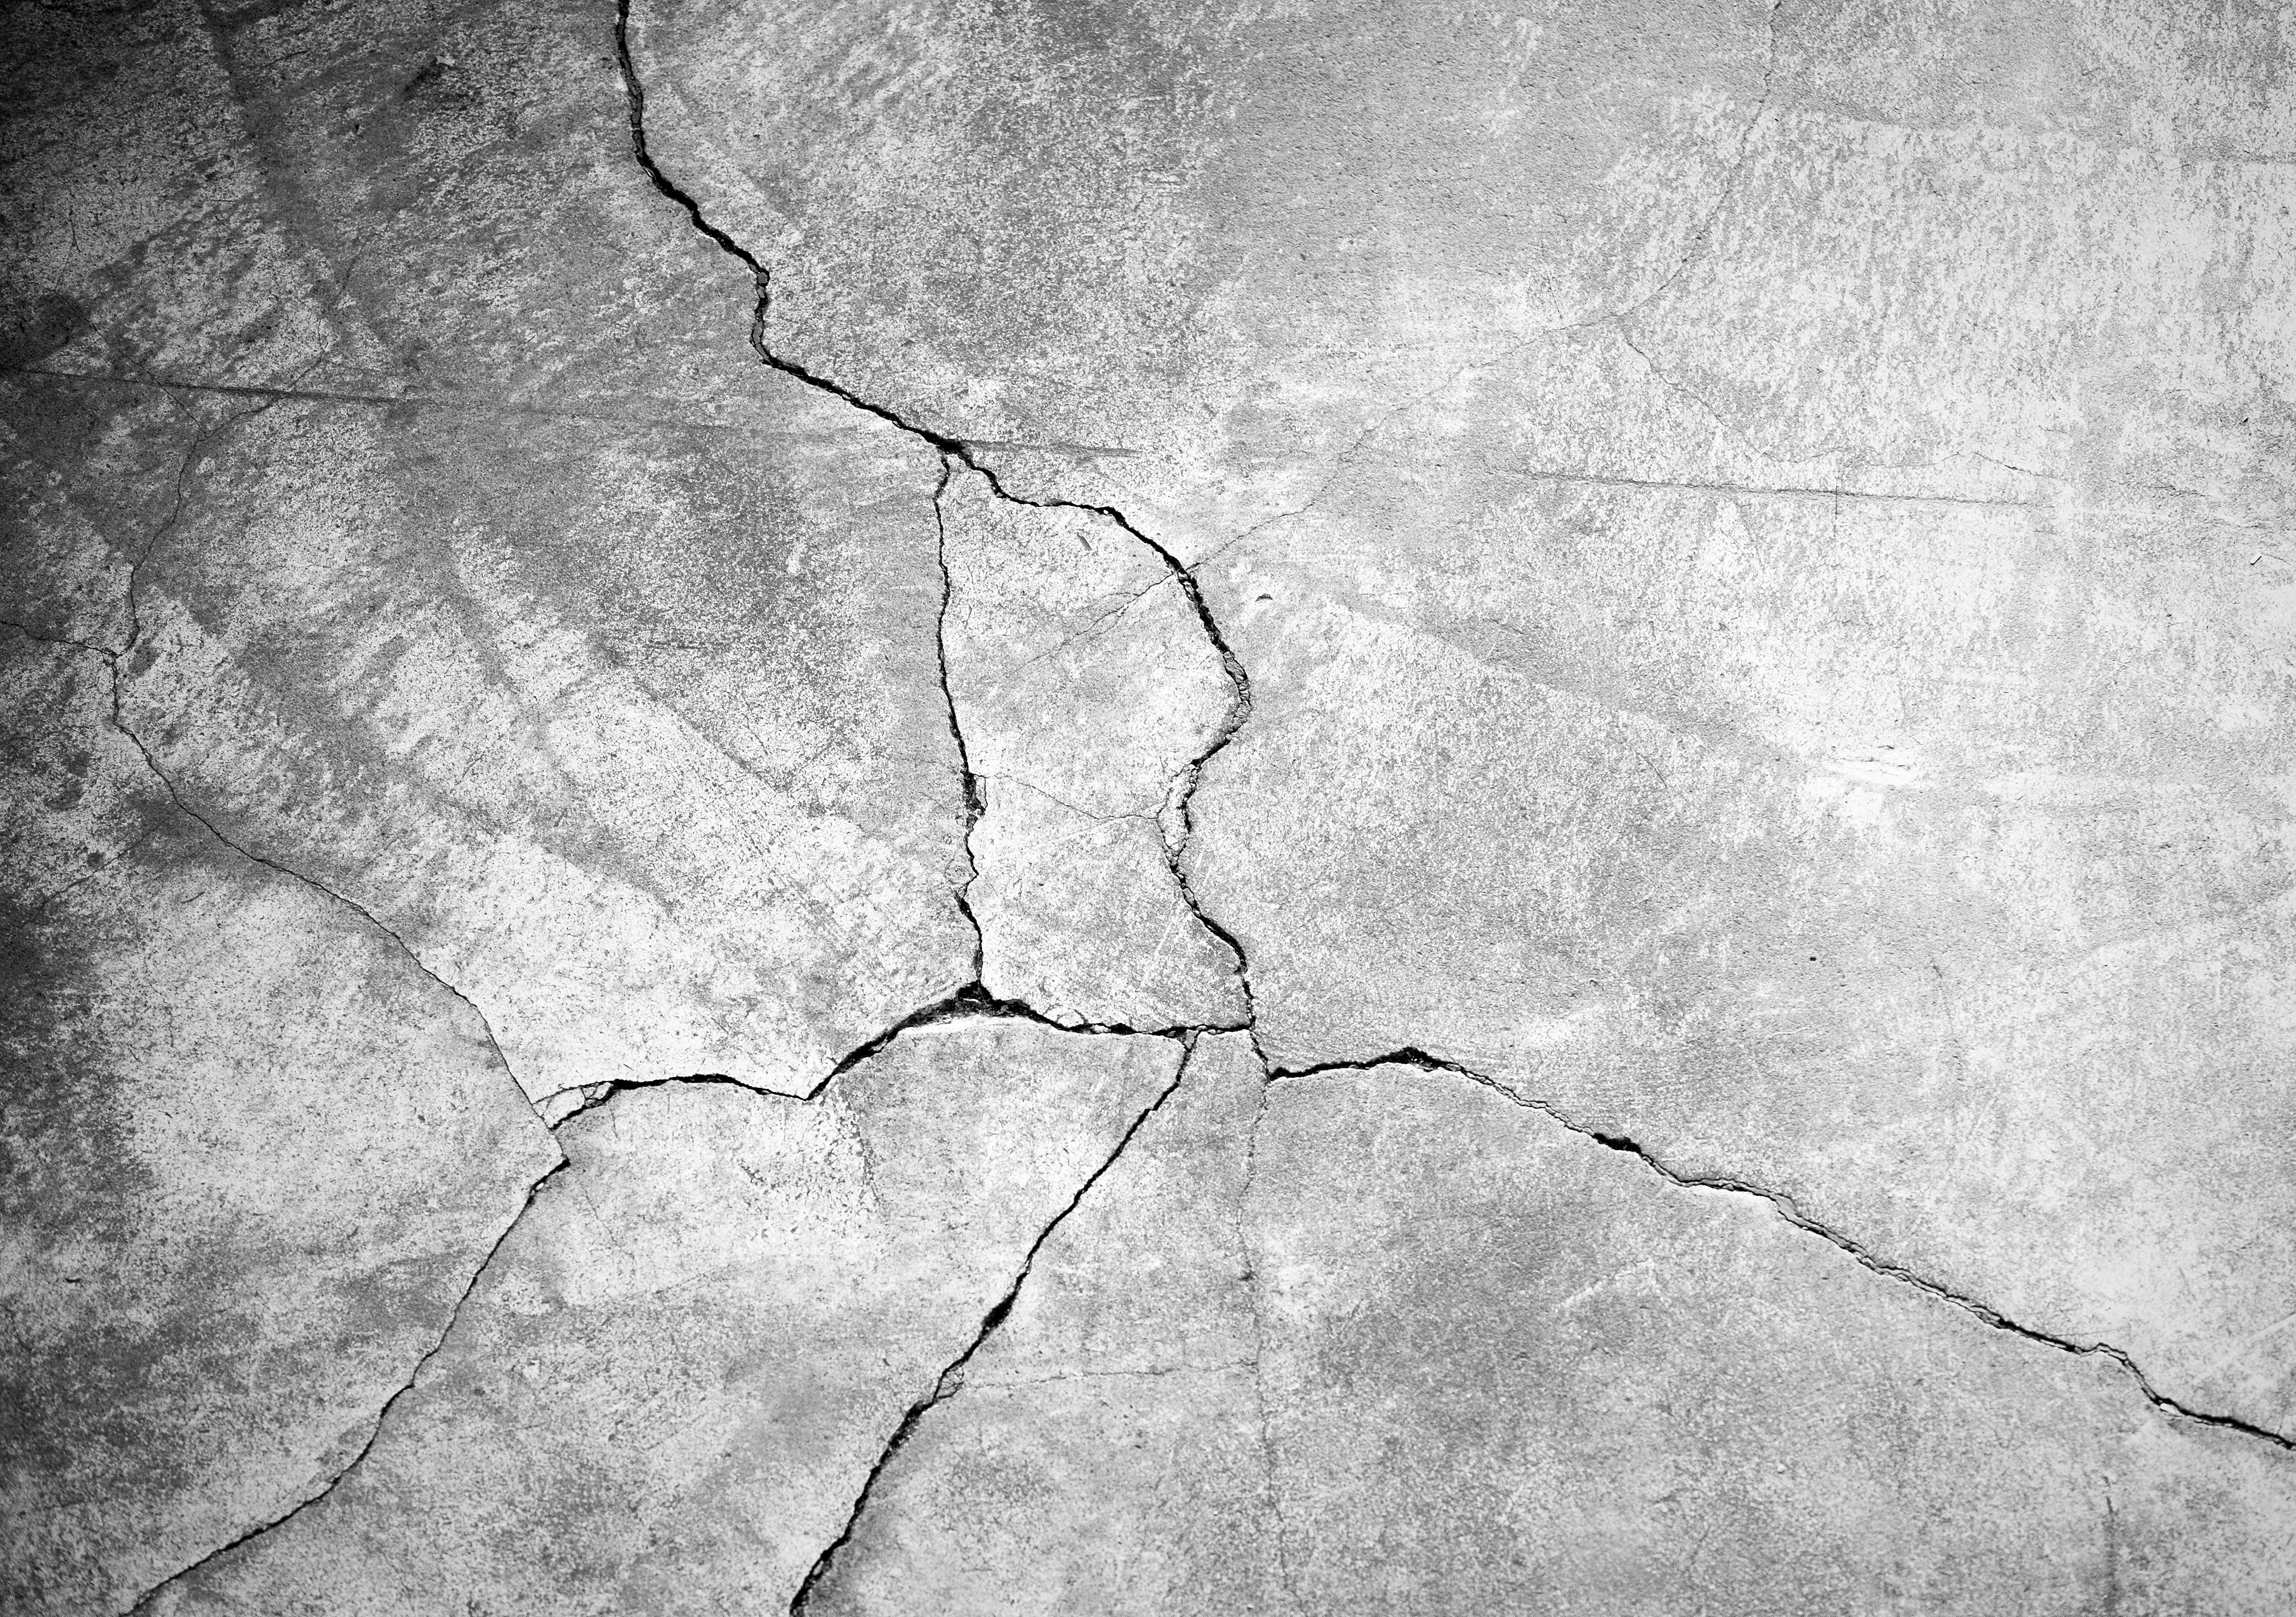 Reinforced concrete is everywhere. But unlike plain concrete, which can last for centuries, reinforced concrete can succumb to rust, deteriorating i